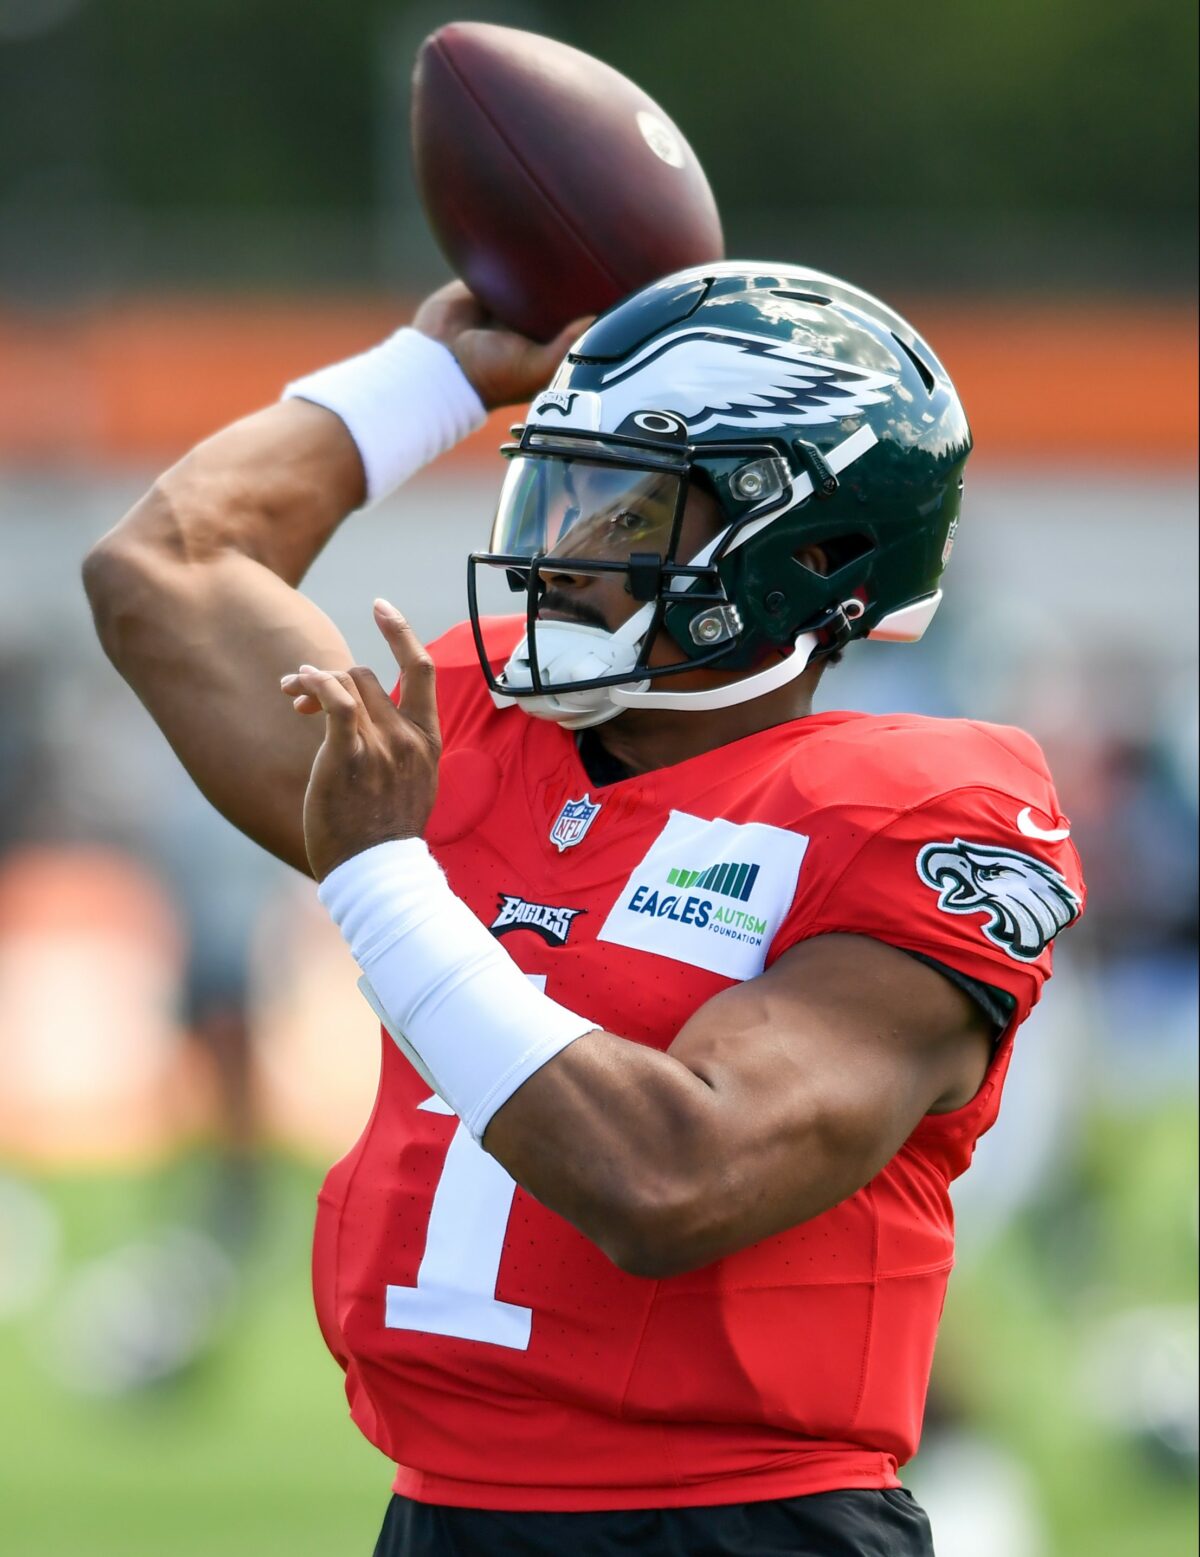 Highlights and notes from Eagles first joint practice session with Browns